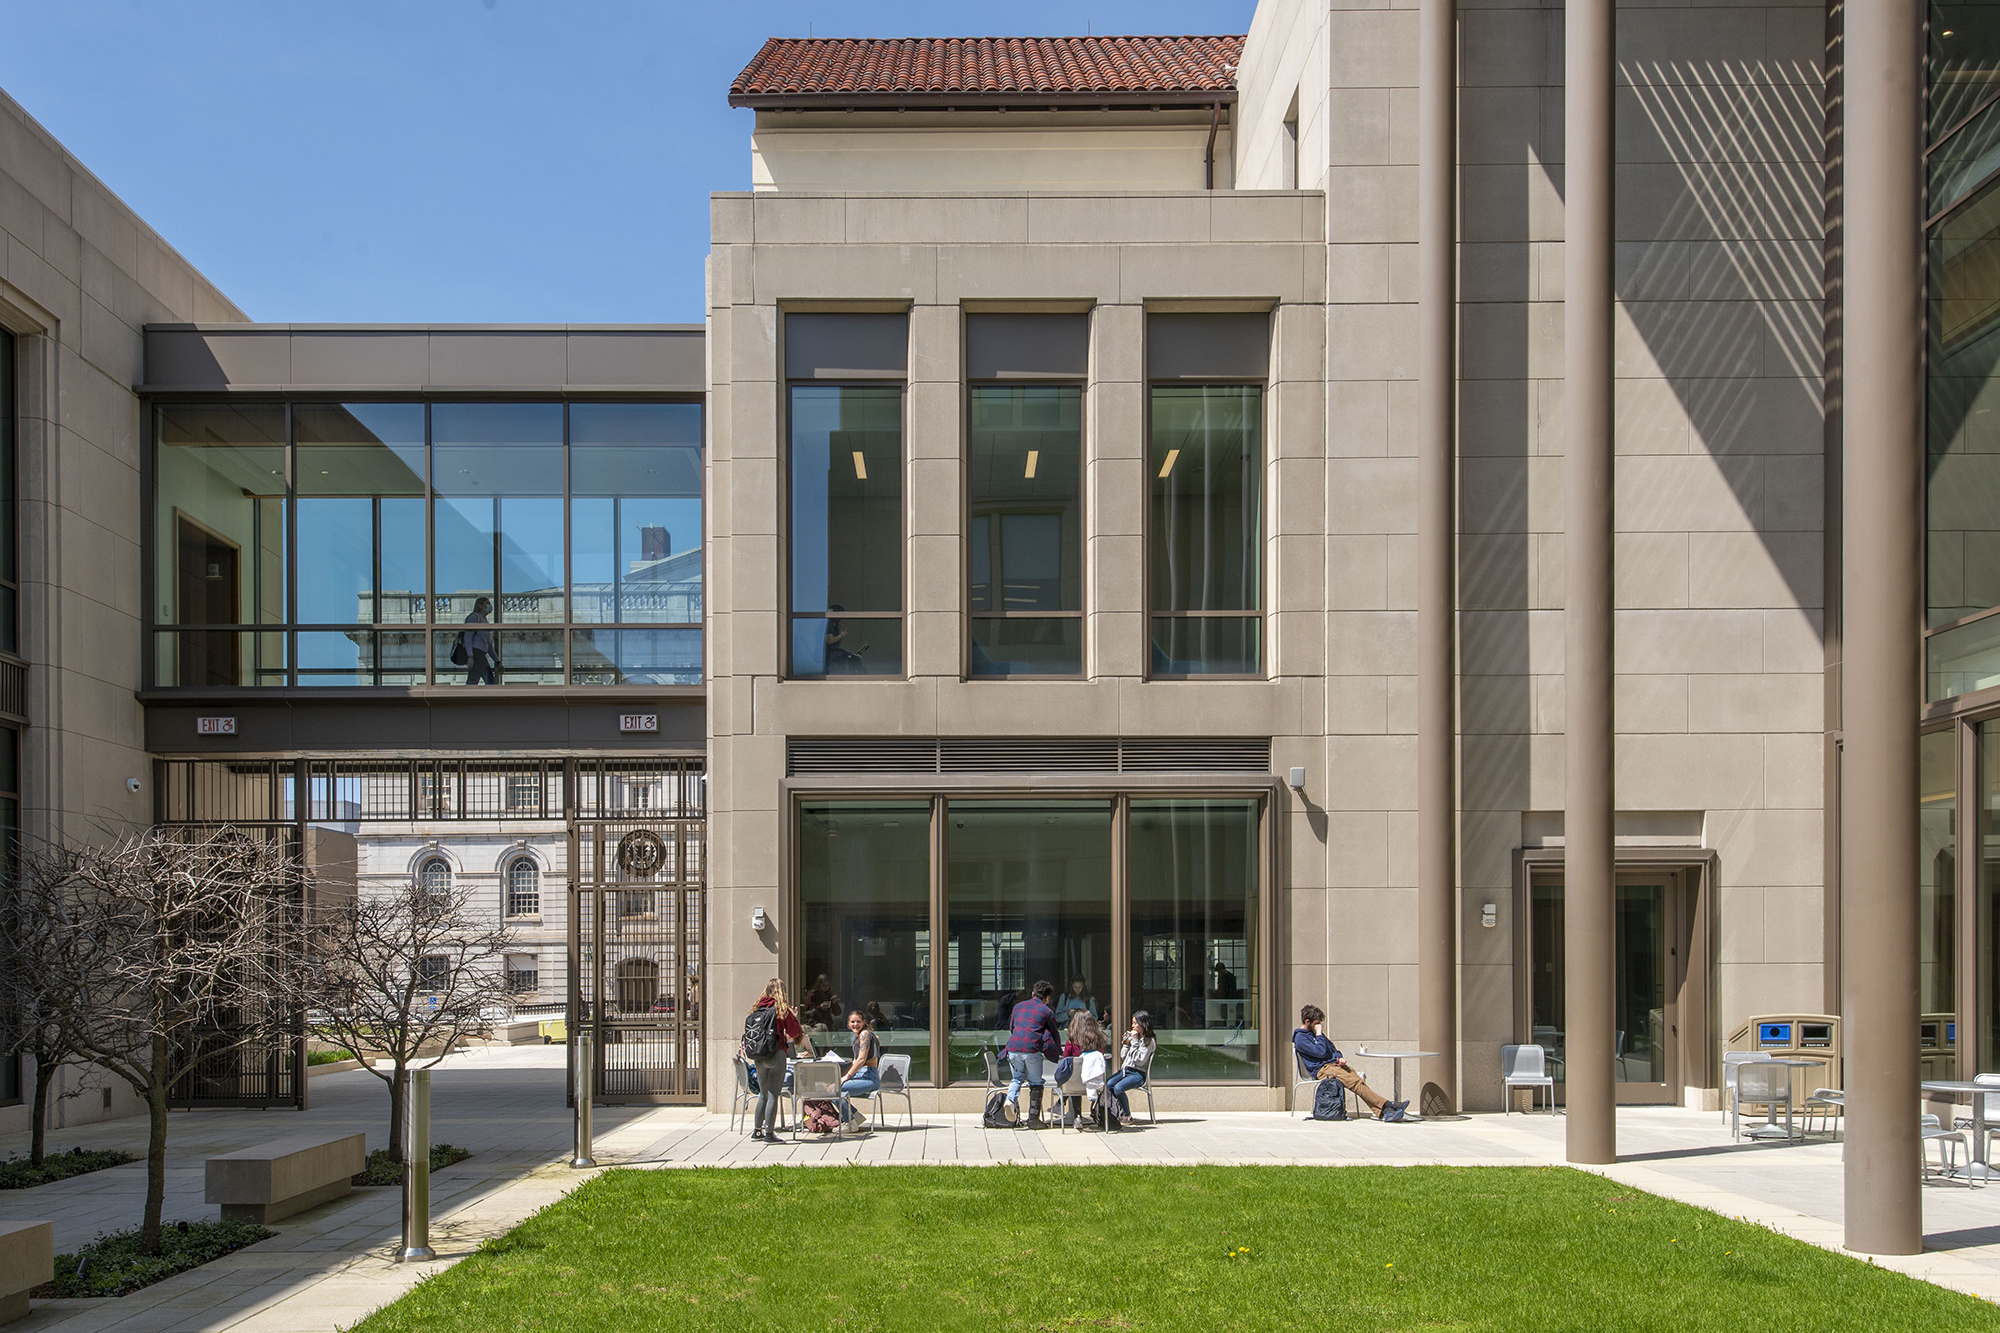 A view of the UConn Hartford courtyard where students can study and gather.